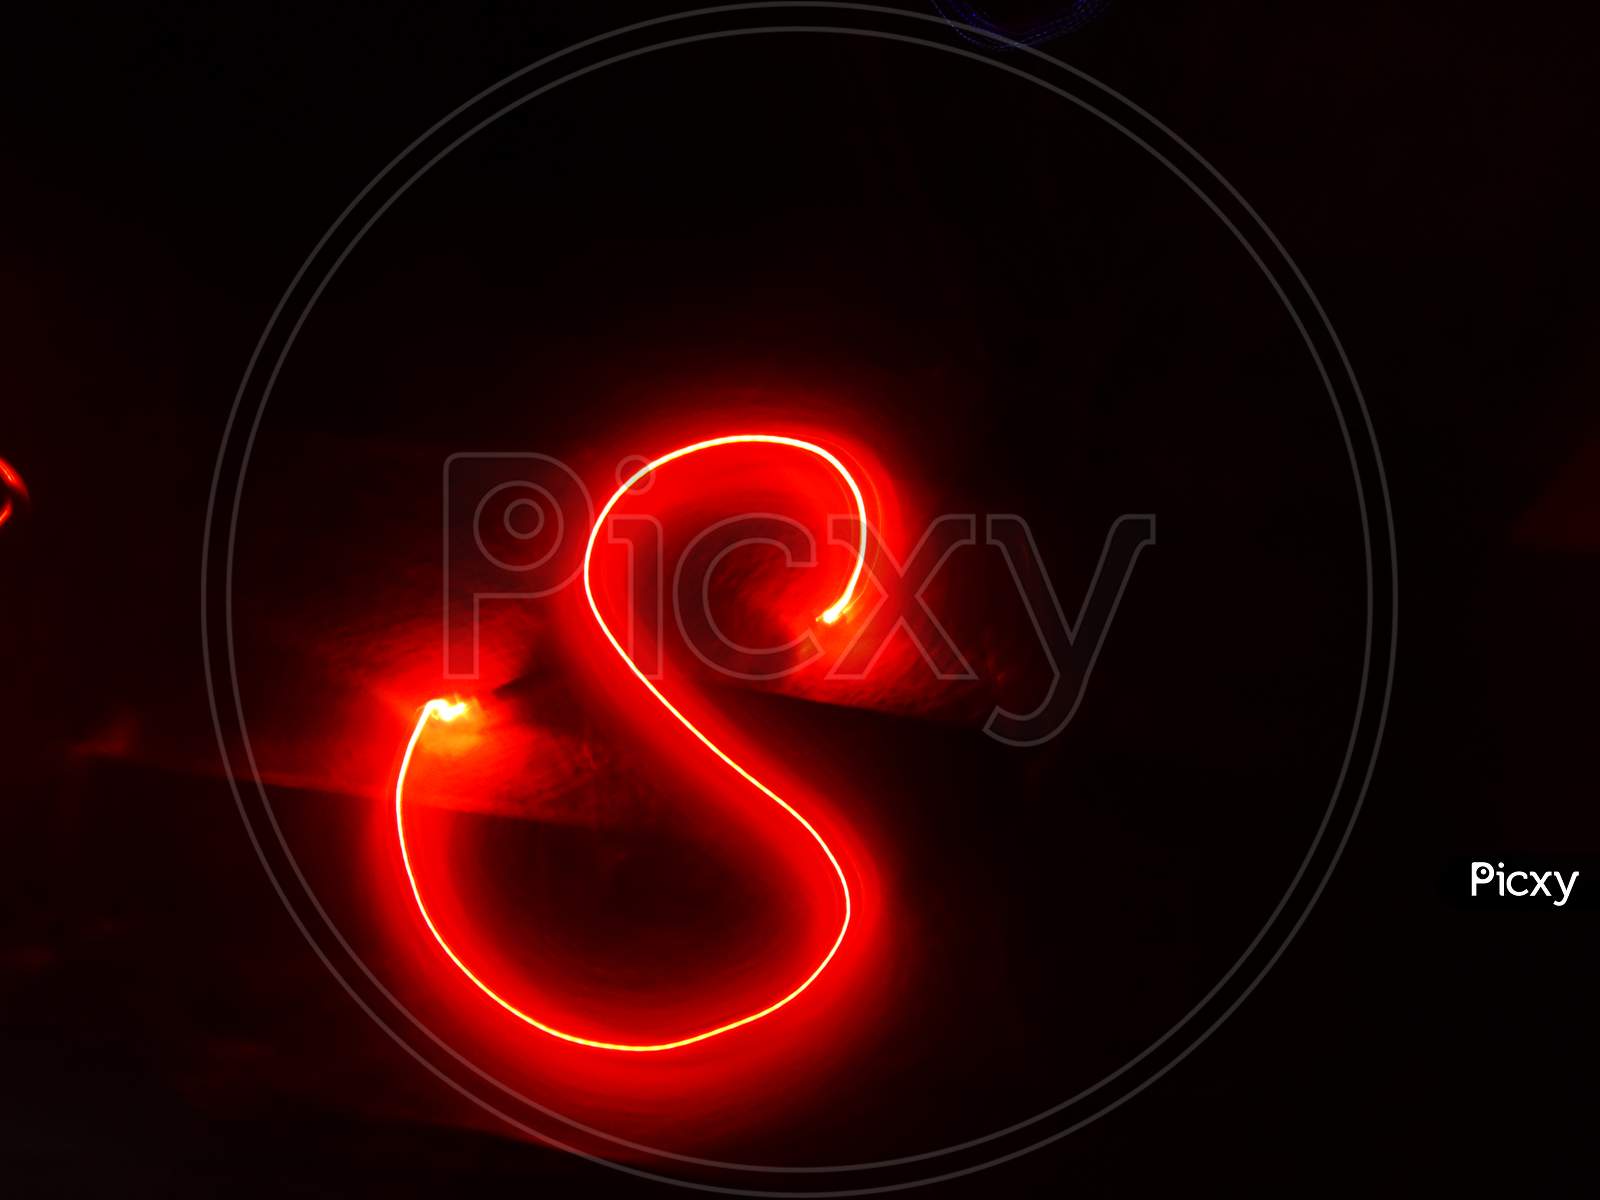 Image Of 3d Illustartion Of Neon Light Of Alphabet S With Black Background Wallpaper Gp205187 Picxy